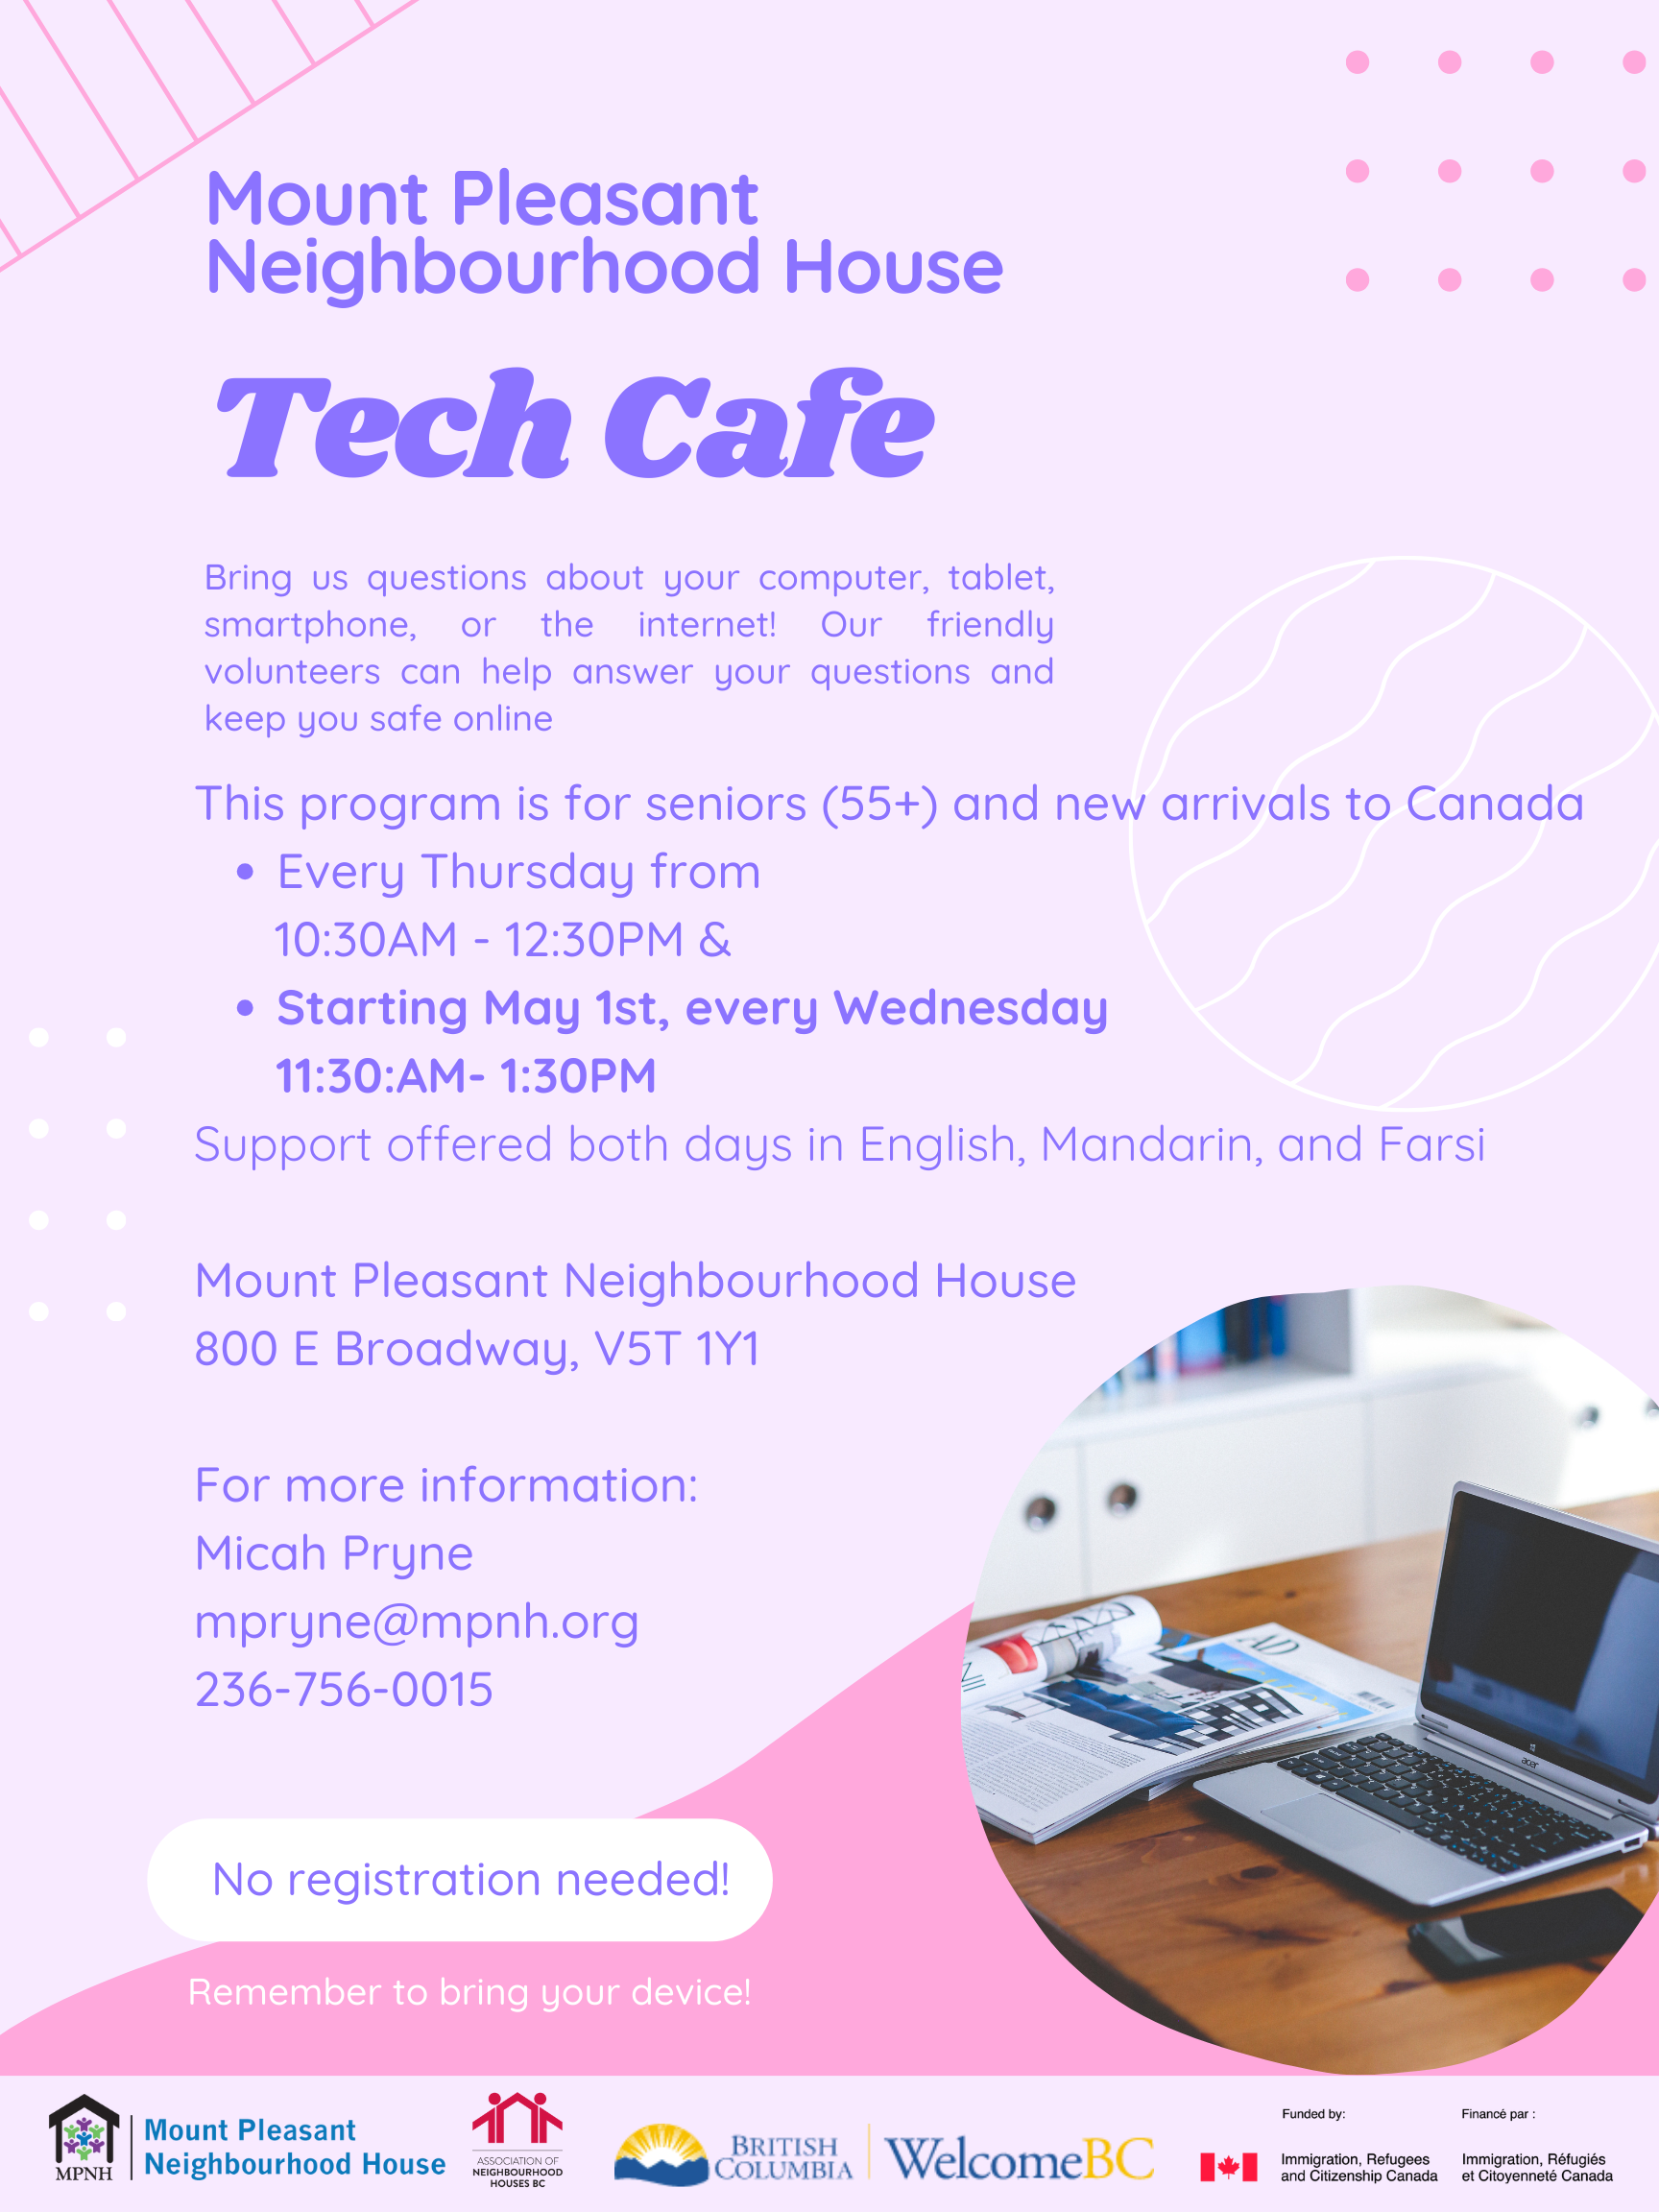 Poster with tech cafe details listed